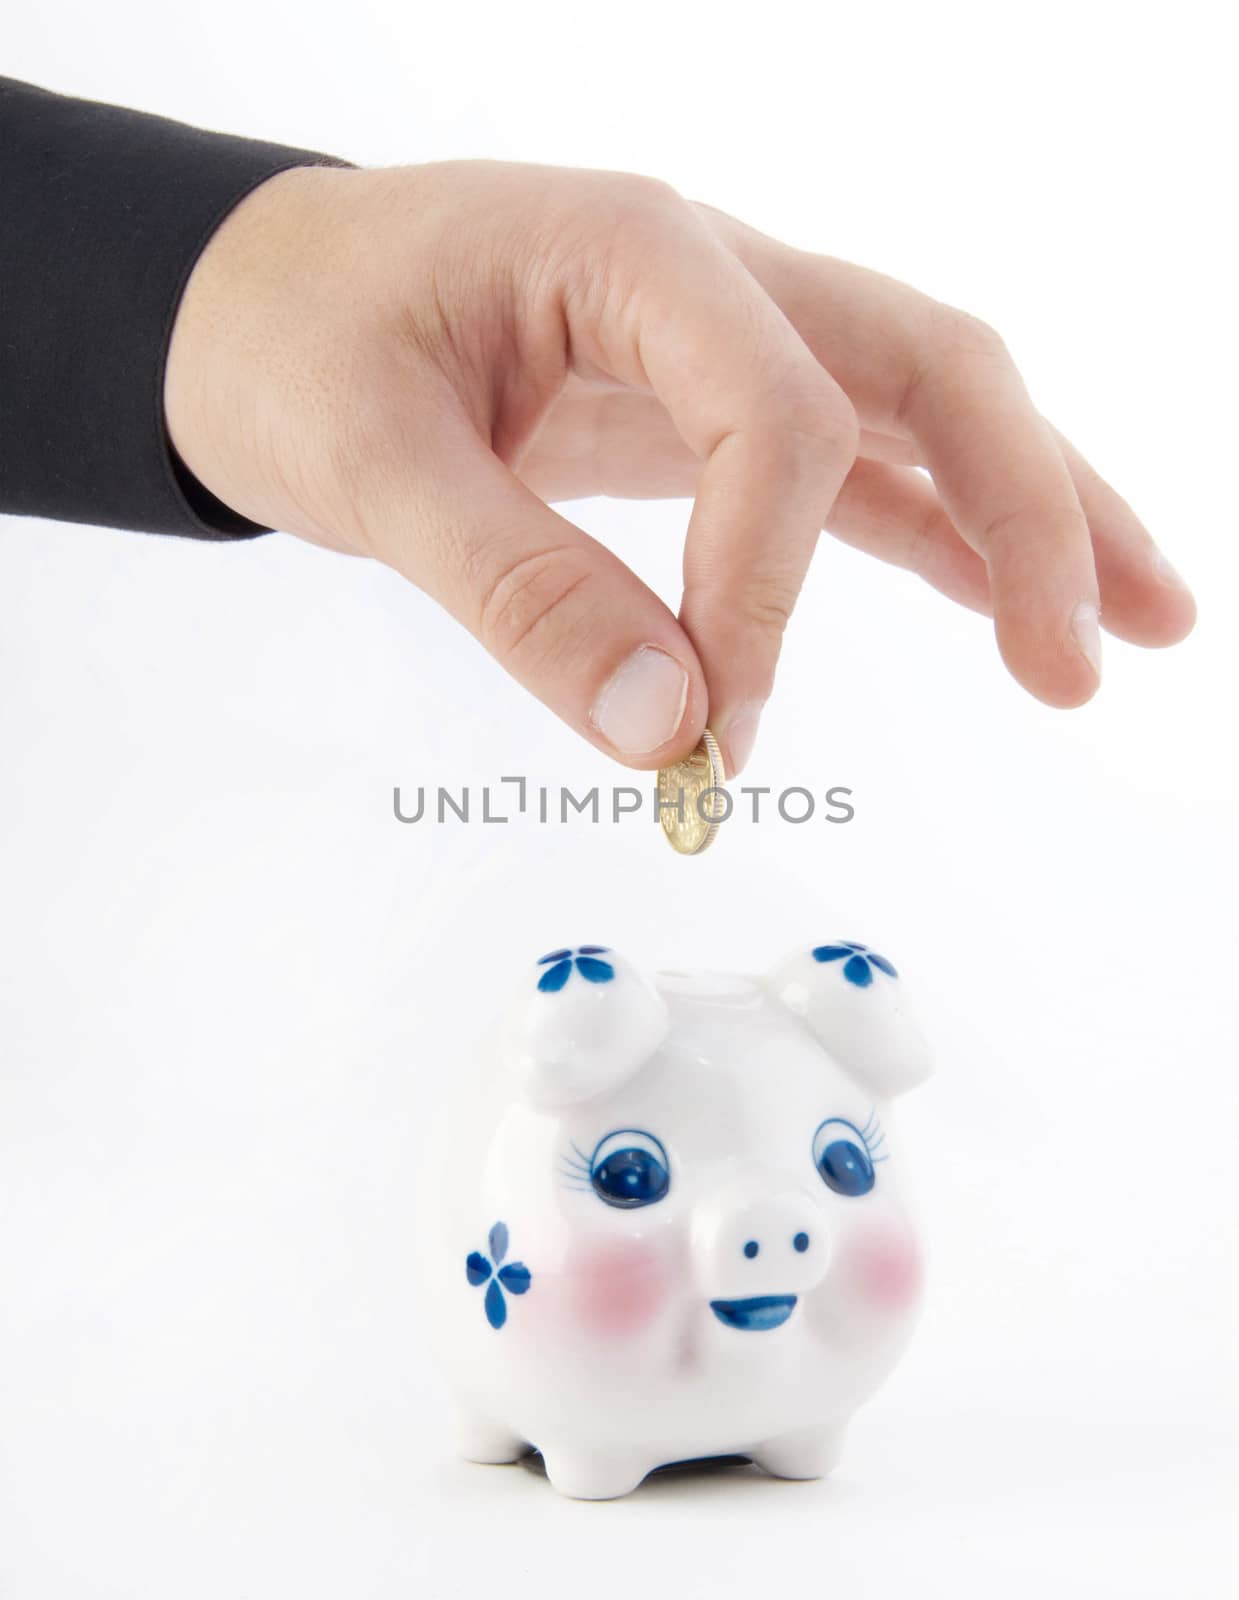 Hand inserting coin into piggy-bank by shutswis